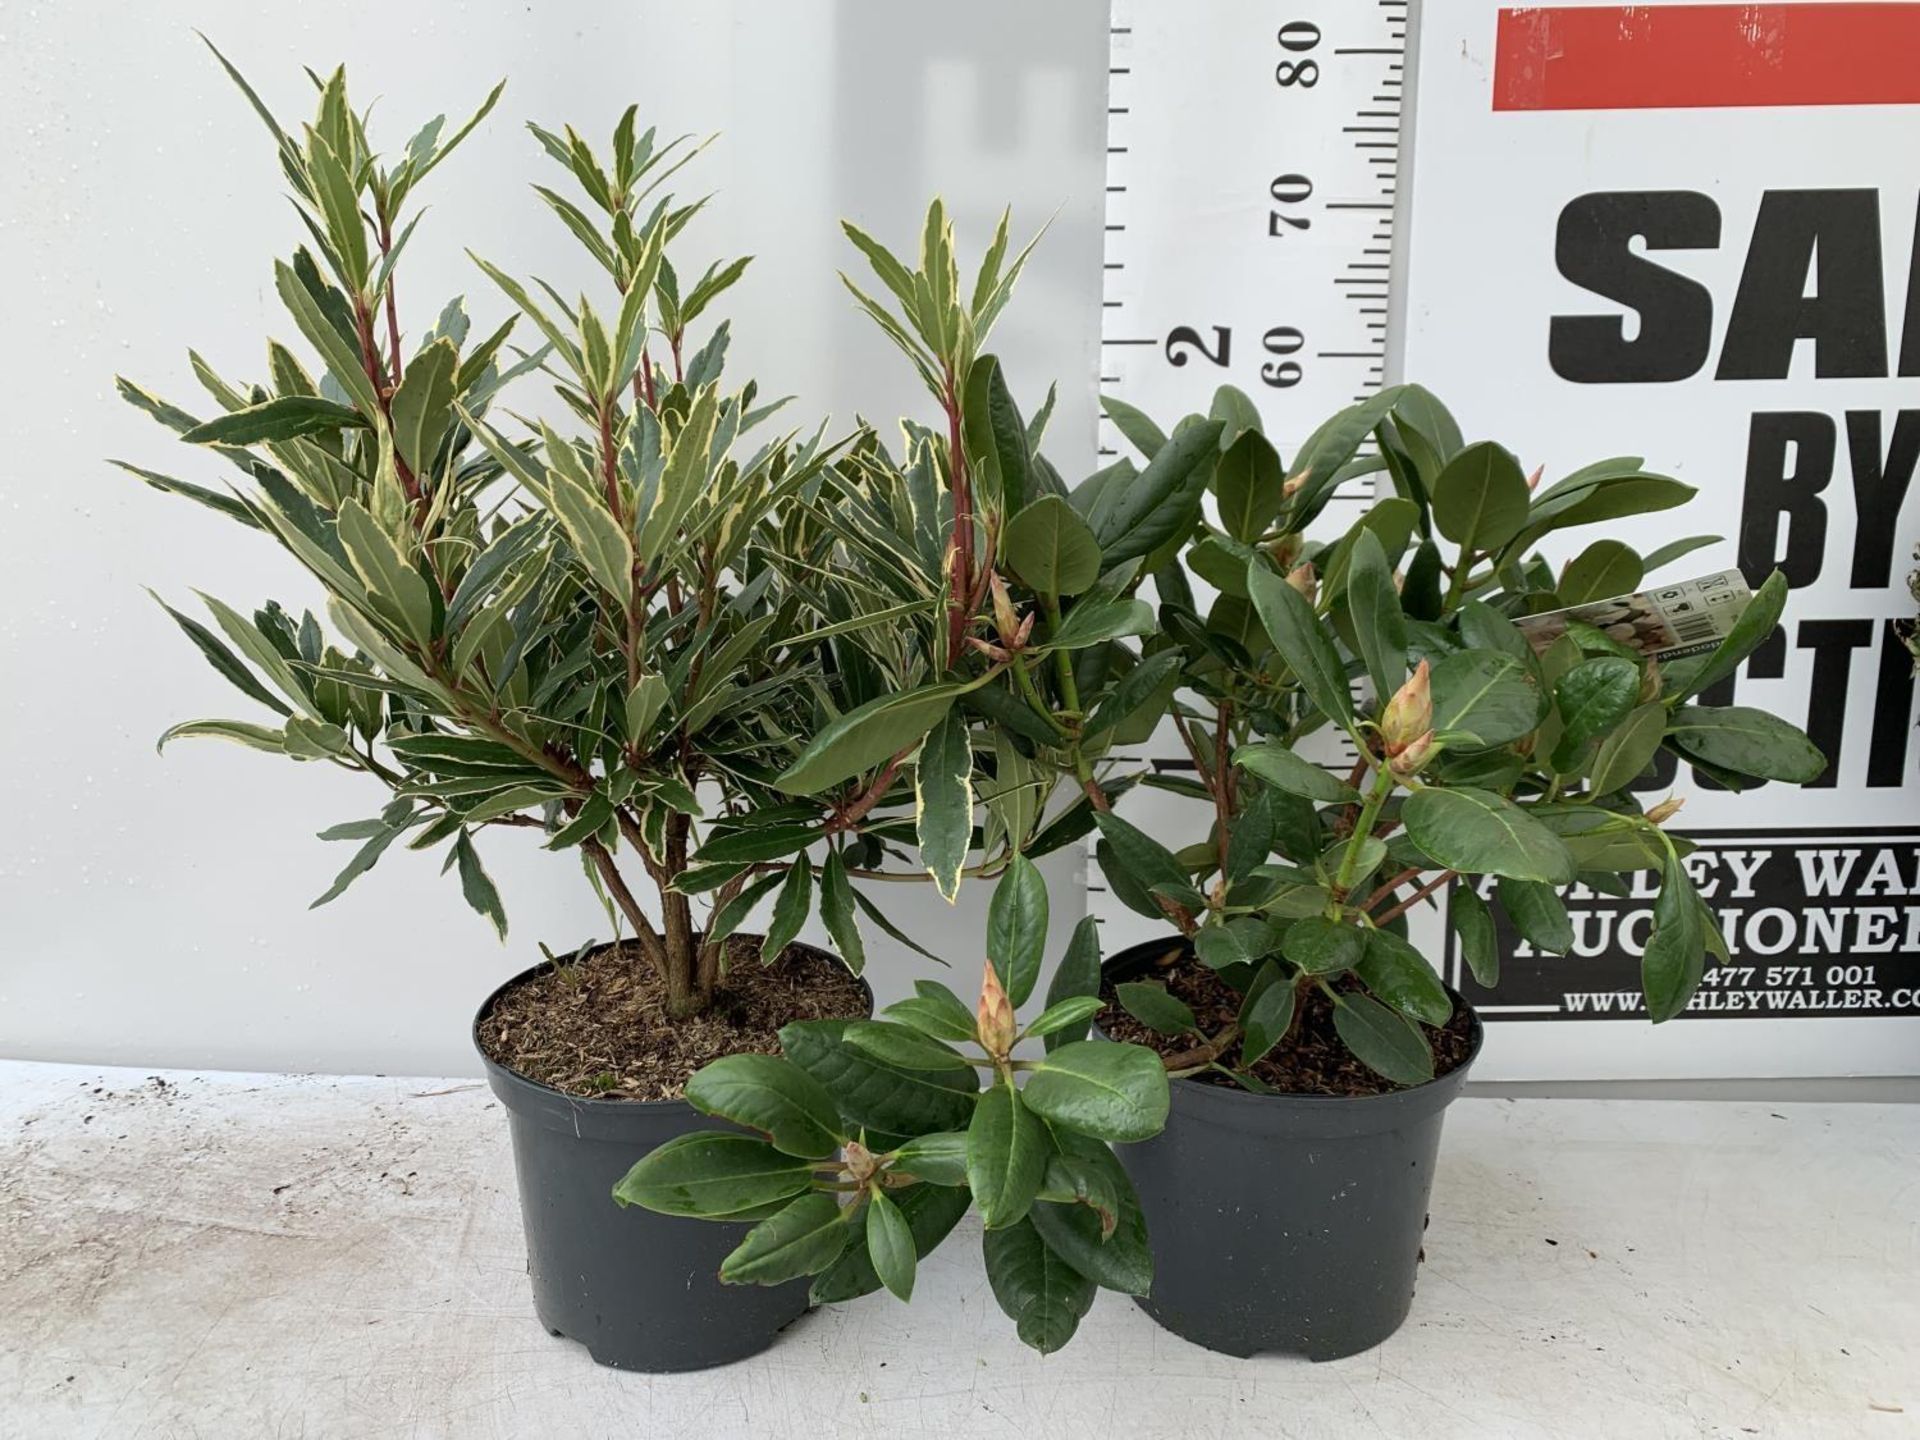 TWO RHODODENDRON PONTICUM VARIEGATUM AND VIRGINIA RICHARDS IN 5 LTR POTS 60CM TALL PLUS VAT TO BE